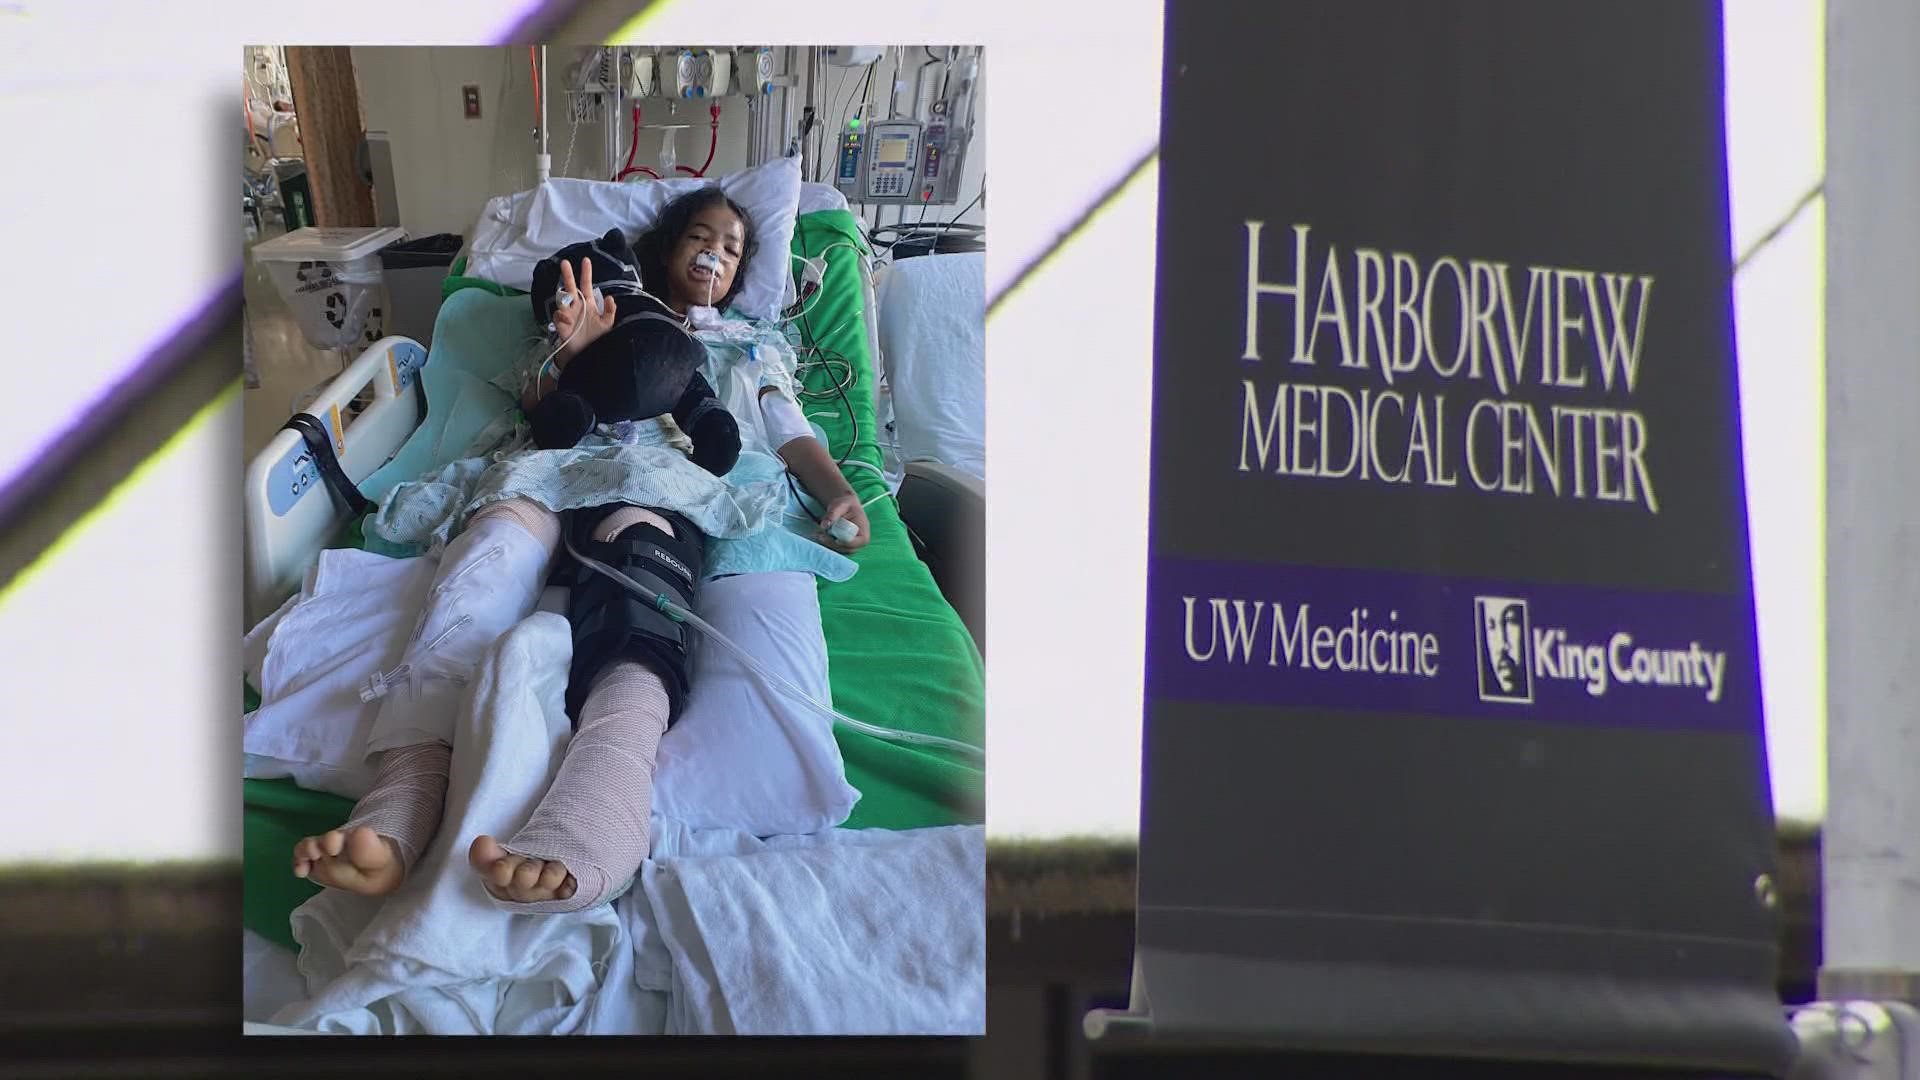 It’s been one week since Symphony Johnson was walking home from school near Auburn and was hit by a car. She is still at Harborview Medical Center.